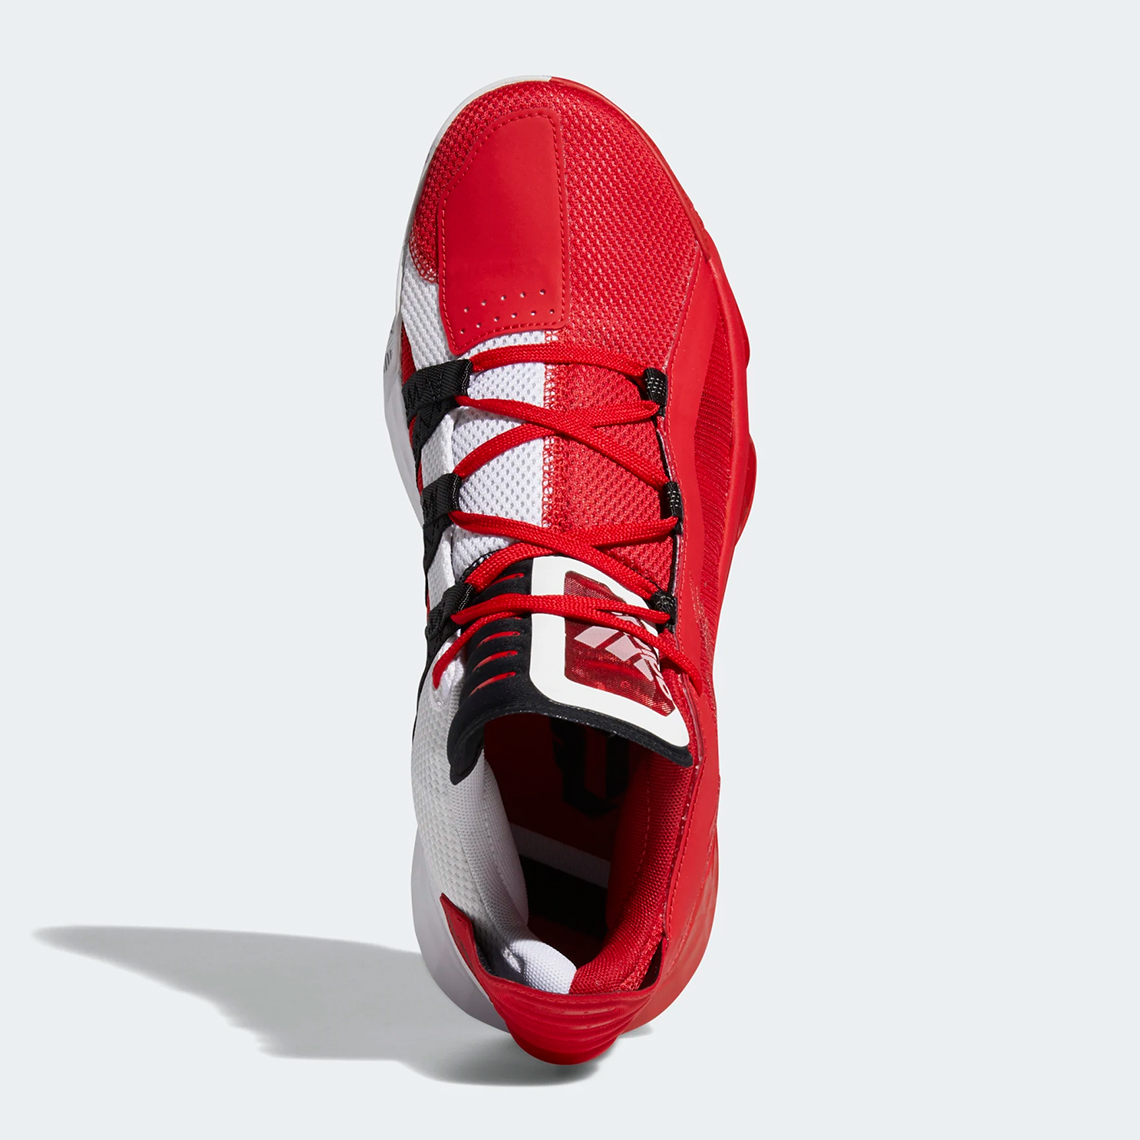 Adidas Dame 6 Red Fy0850 4